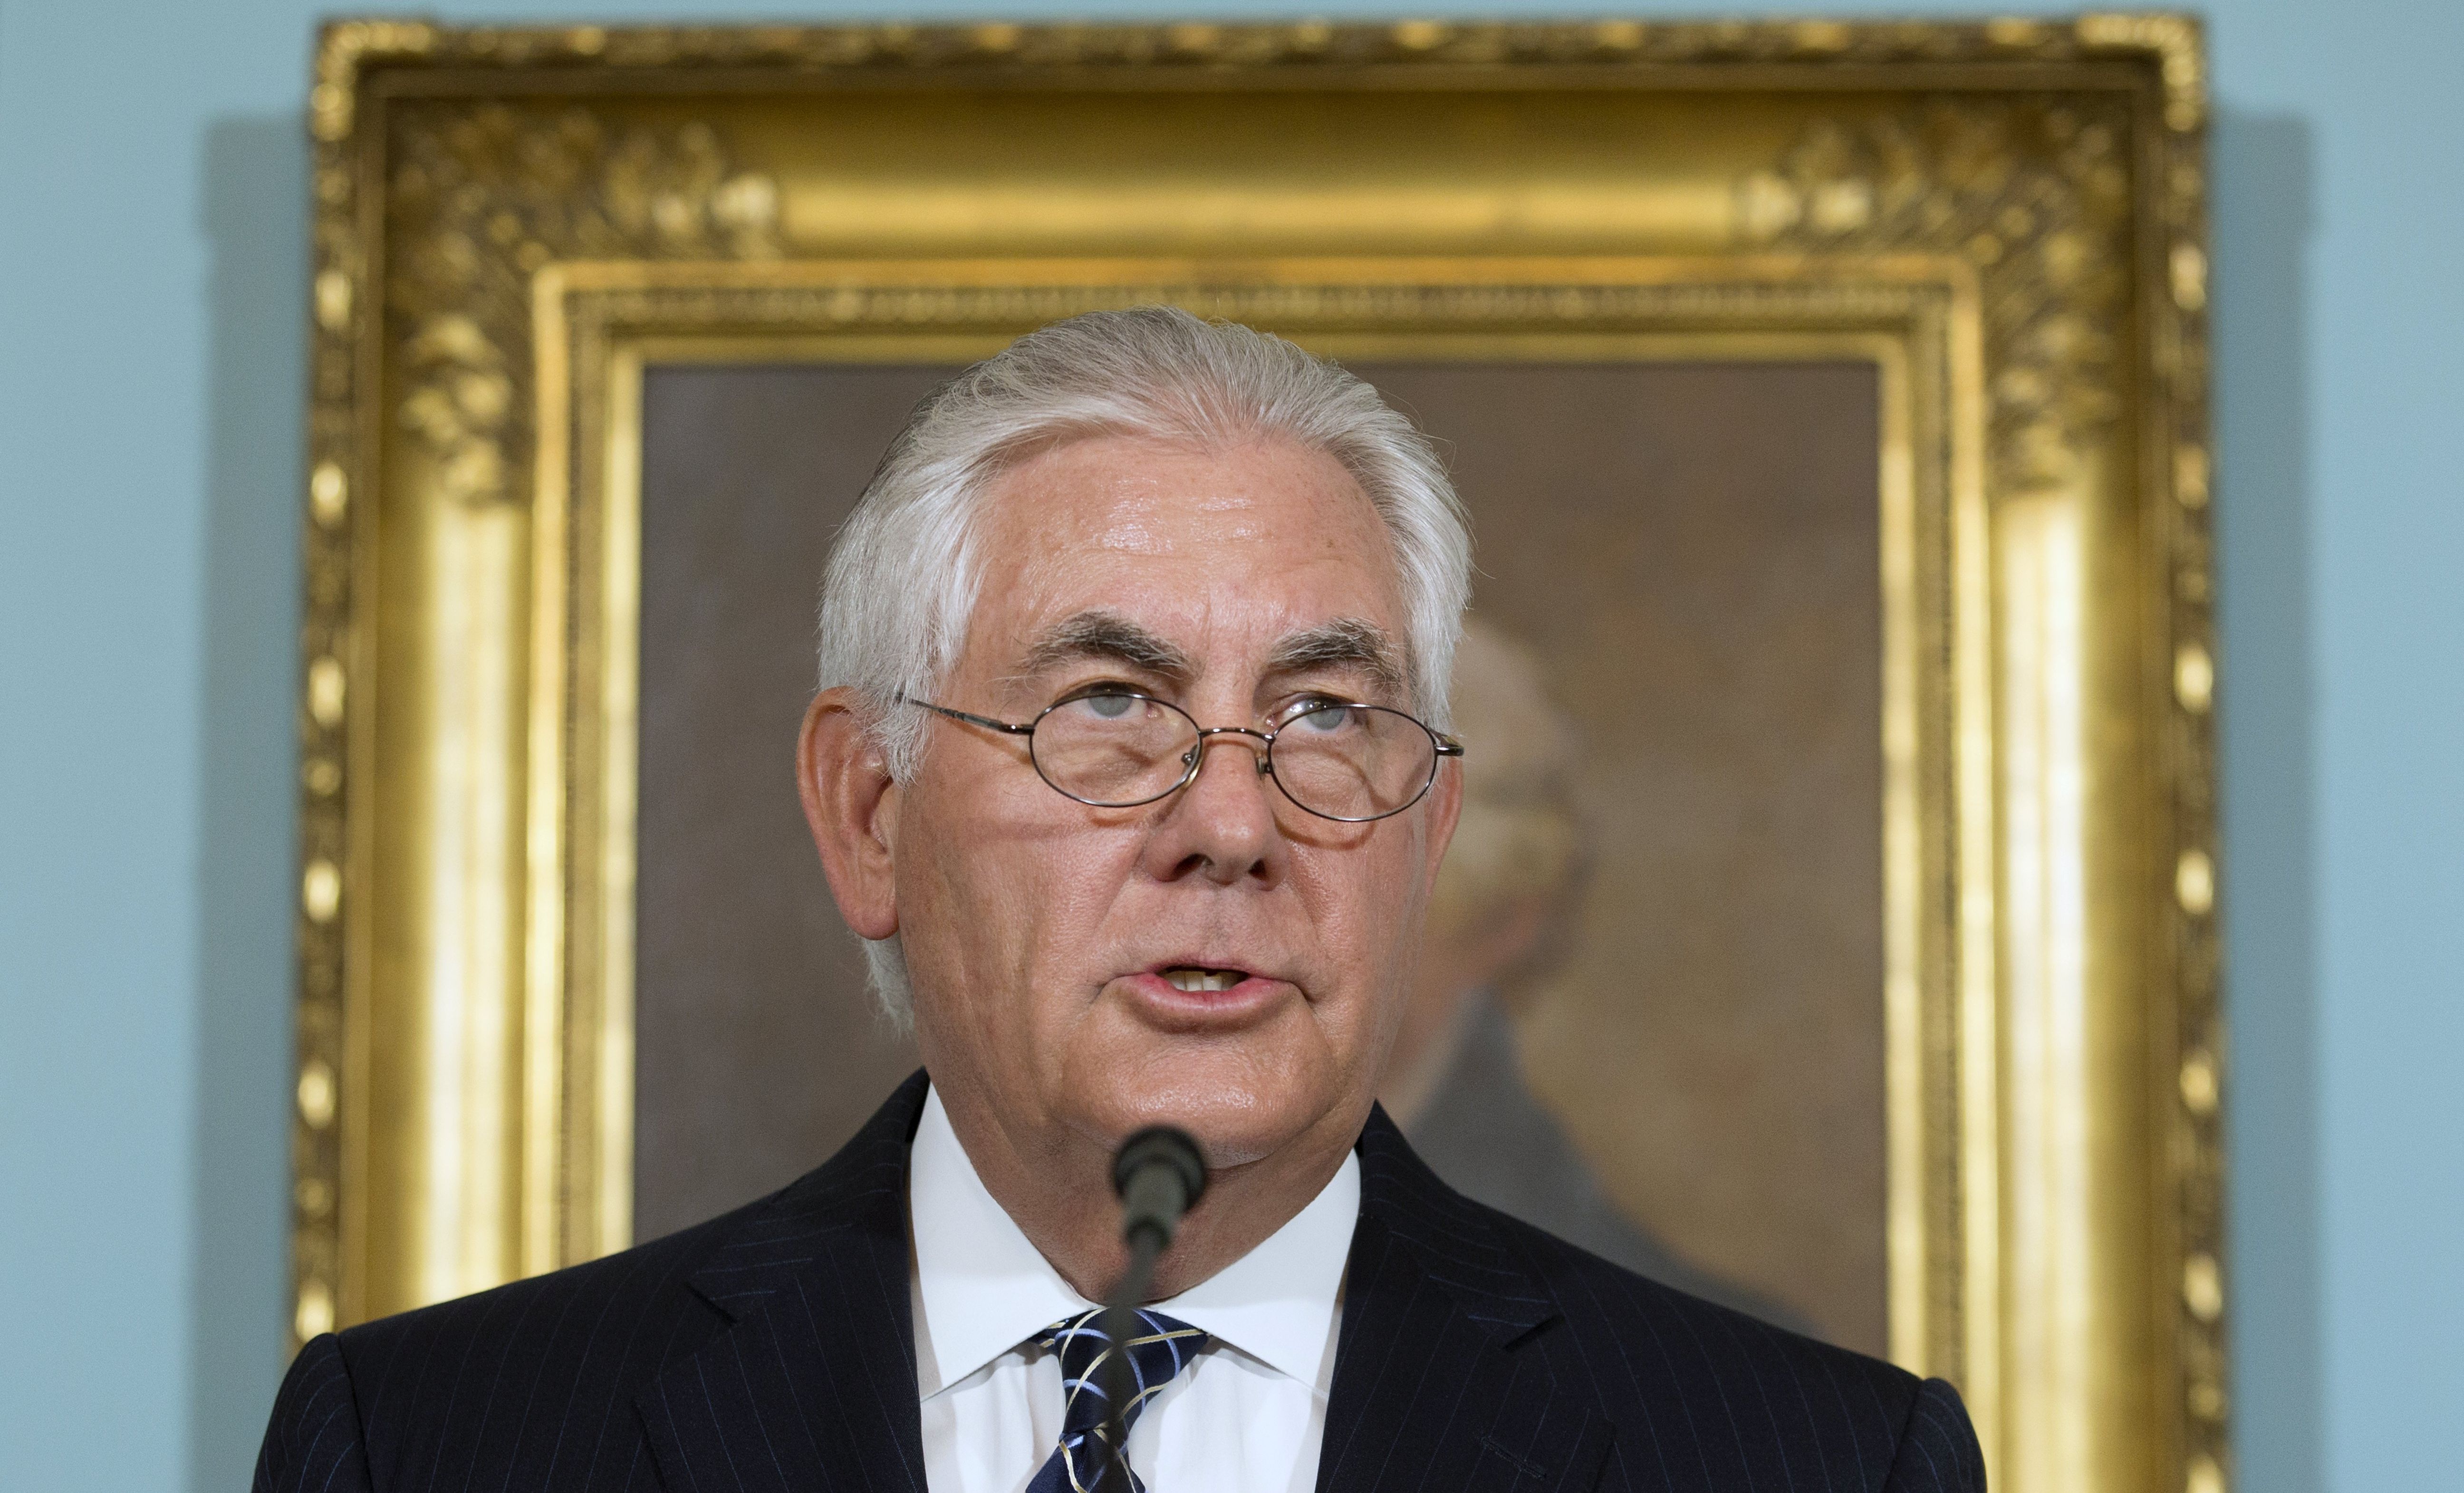 epa06145727 US Secretary of State Rex Tillerson delivers remarks at the release of the 2016 International Religious Freedom Annual report, at the State Department in Washington, DC, USA, 15 August 2017.  EPA/MICHAEL REYNOLDS